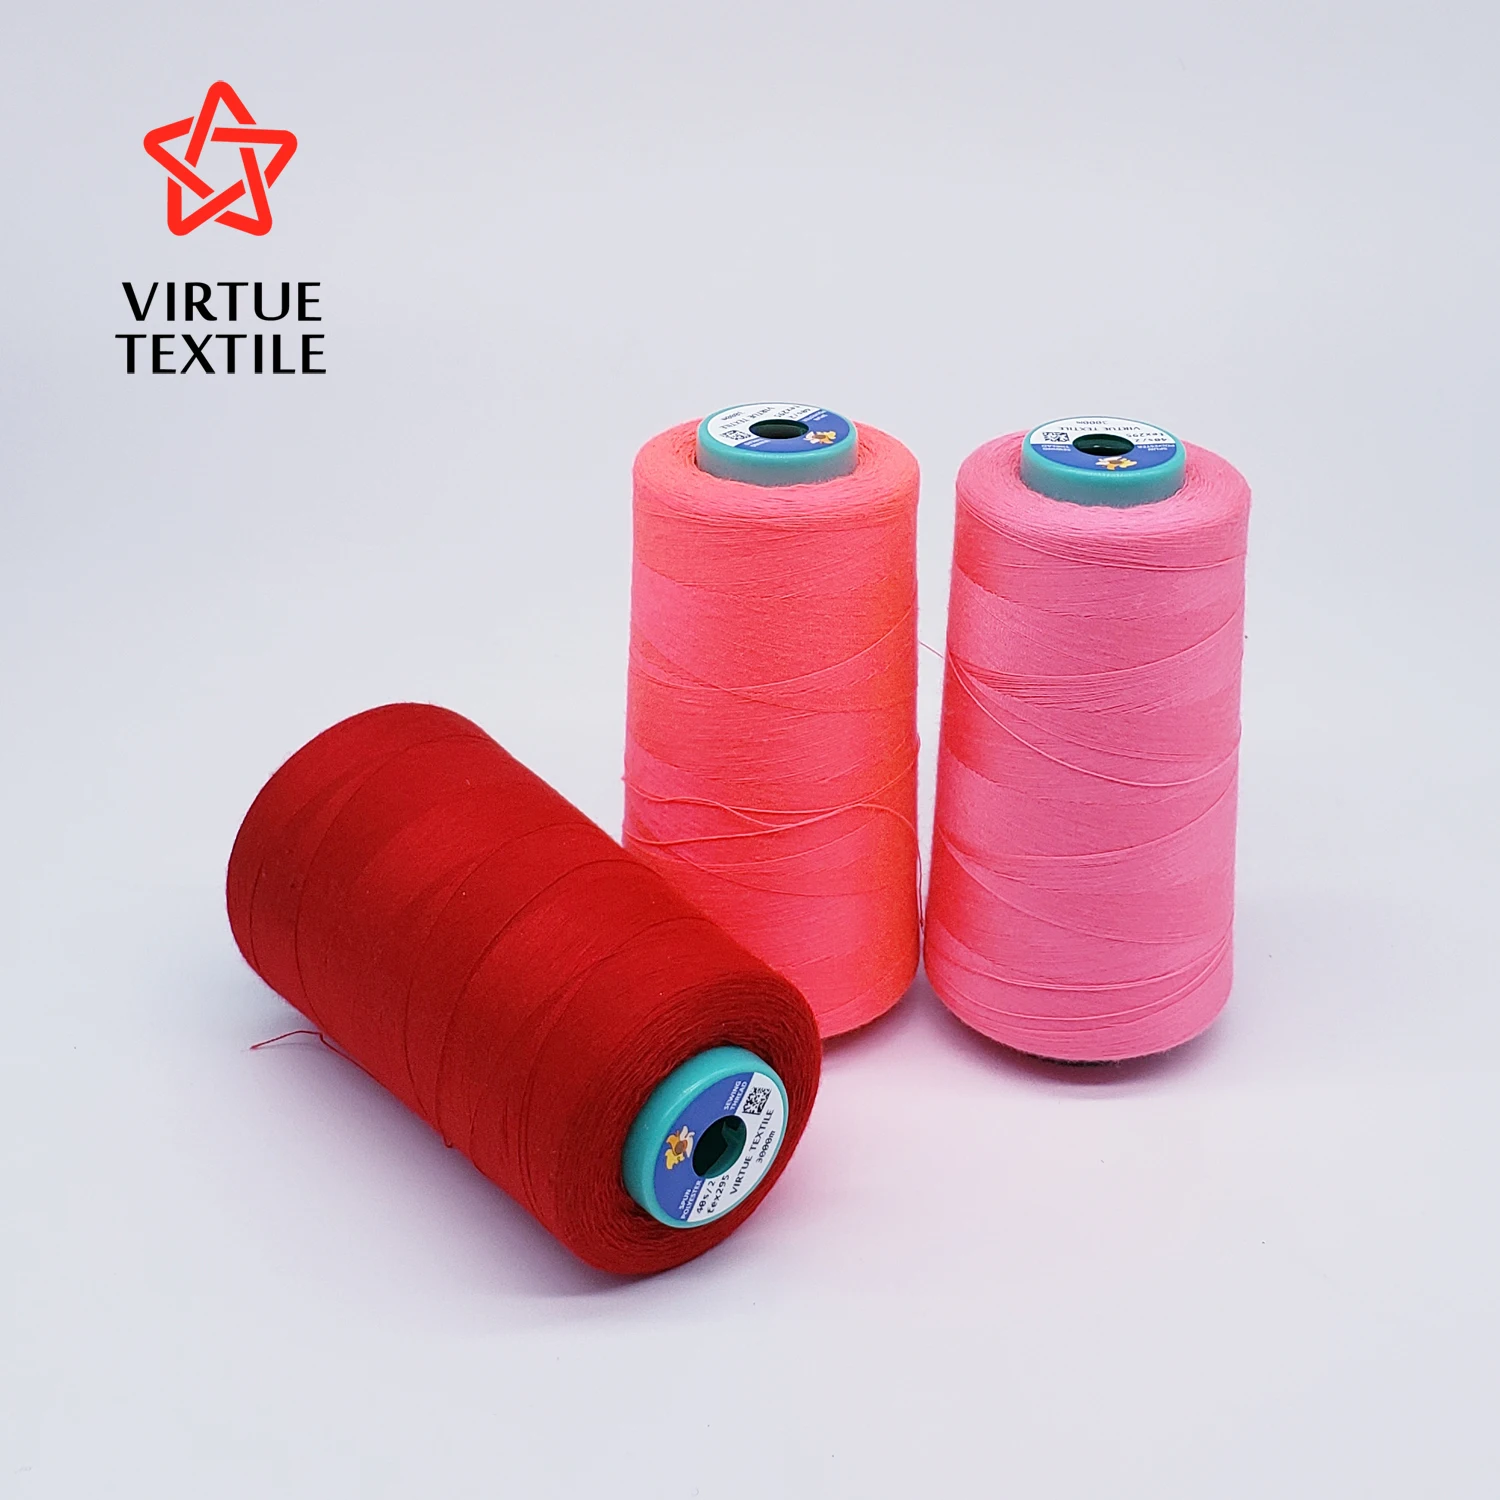 
100% poly poly core spun polyester sewing thread 40s/2 